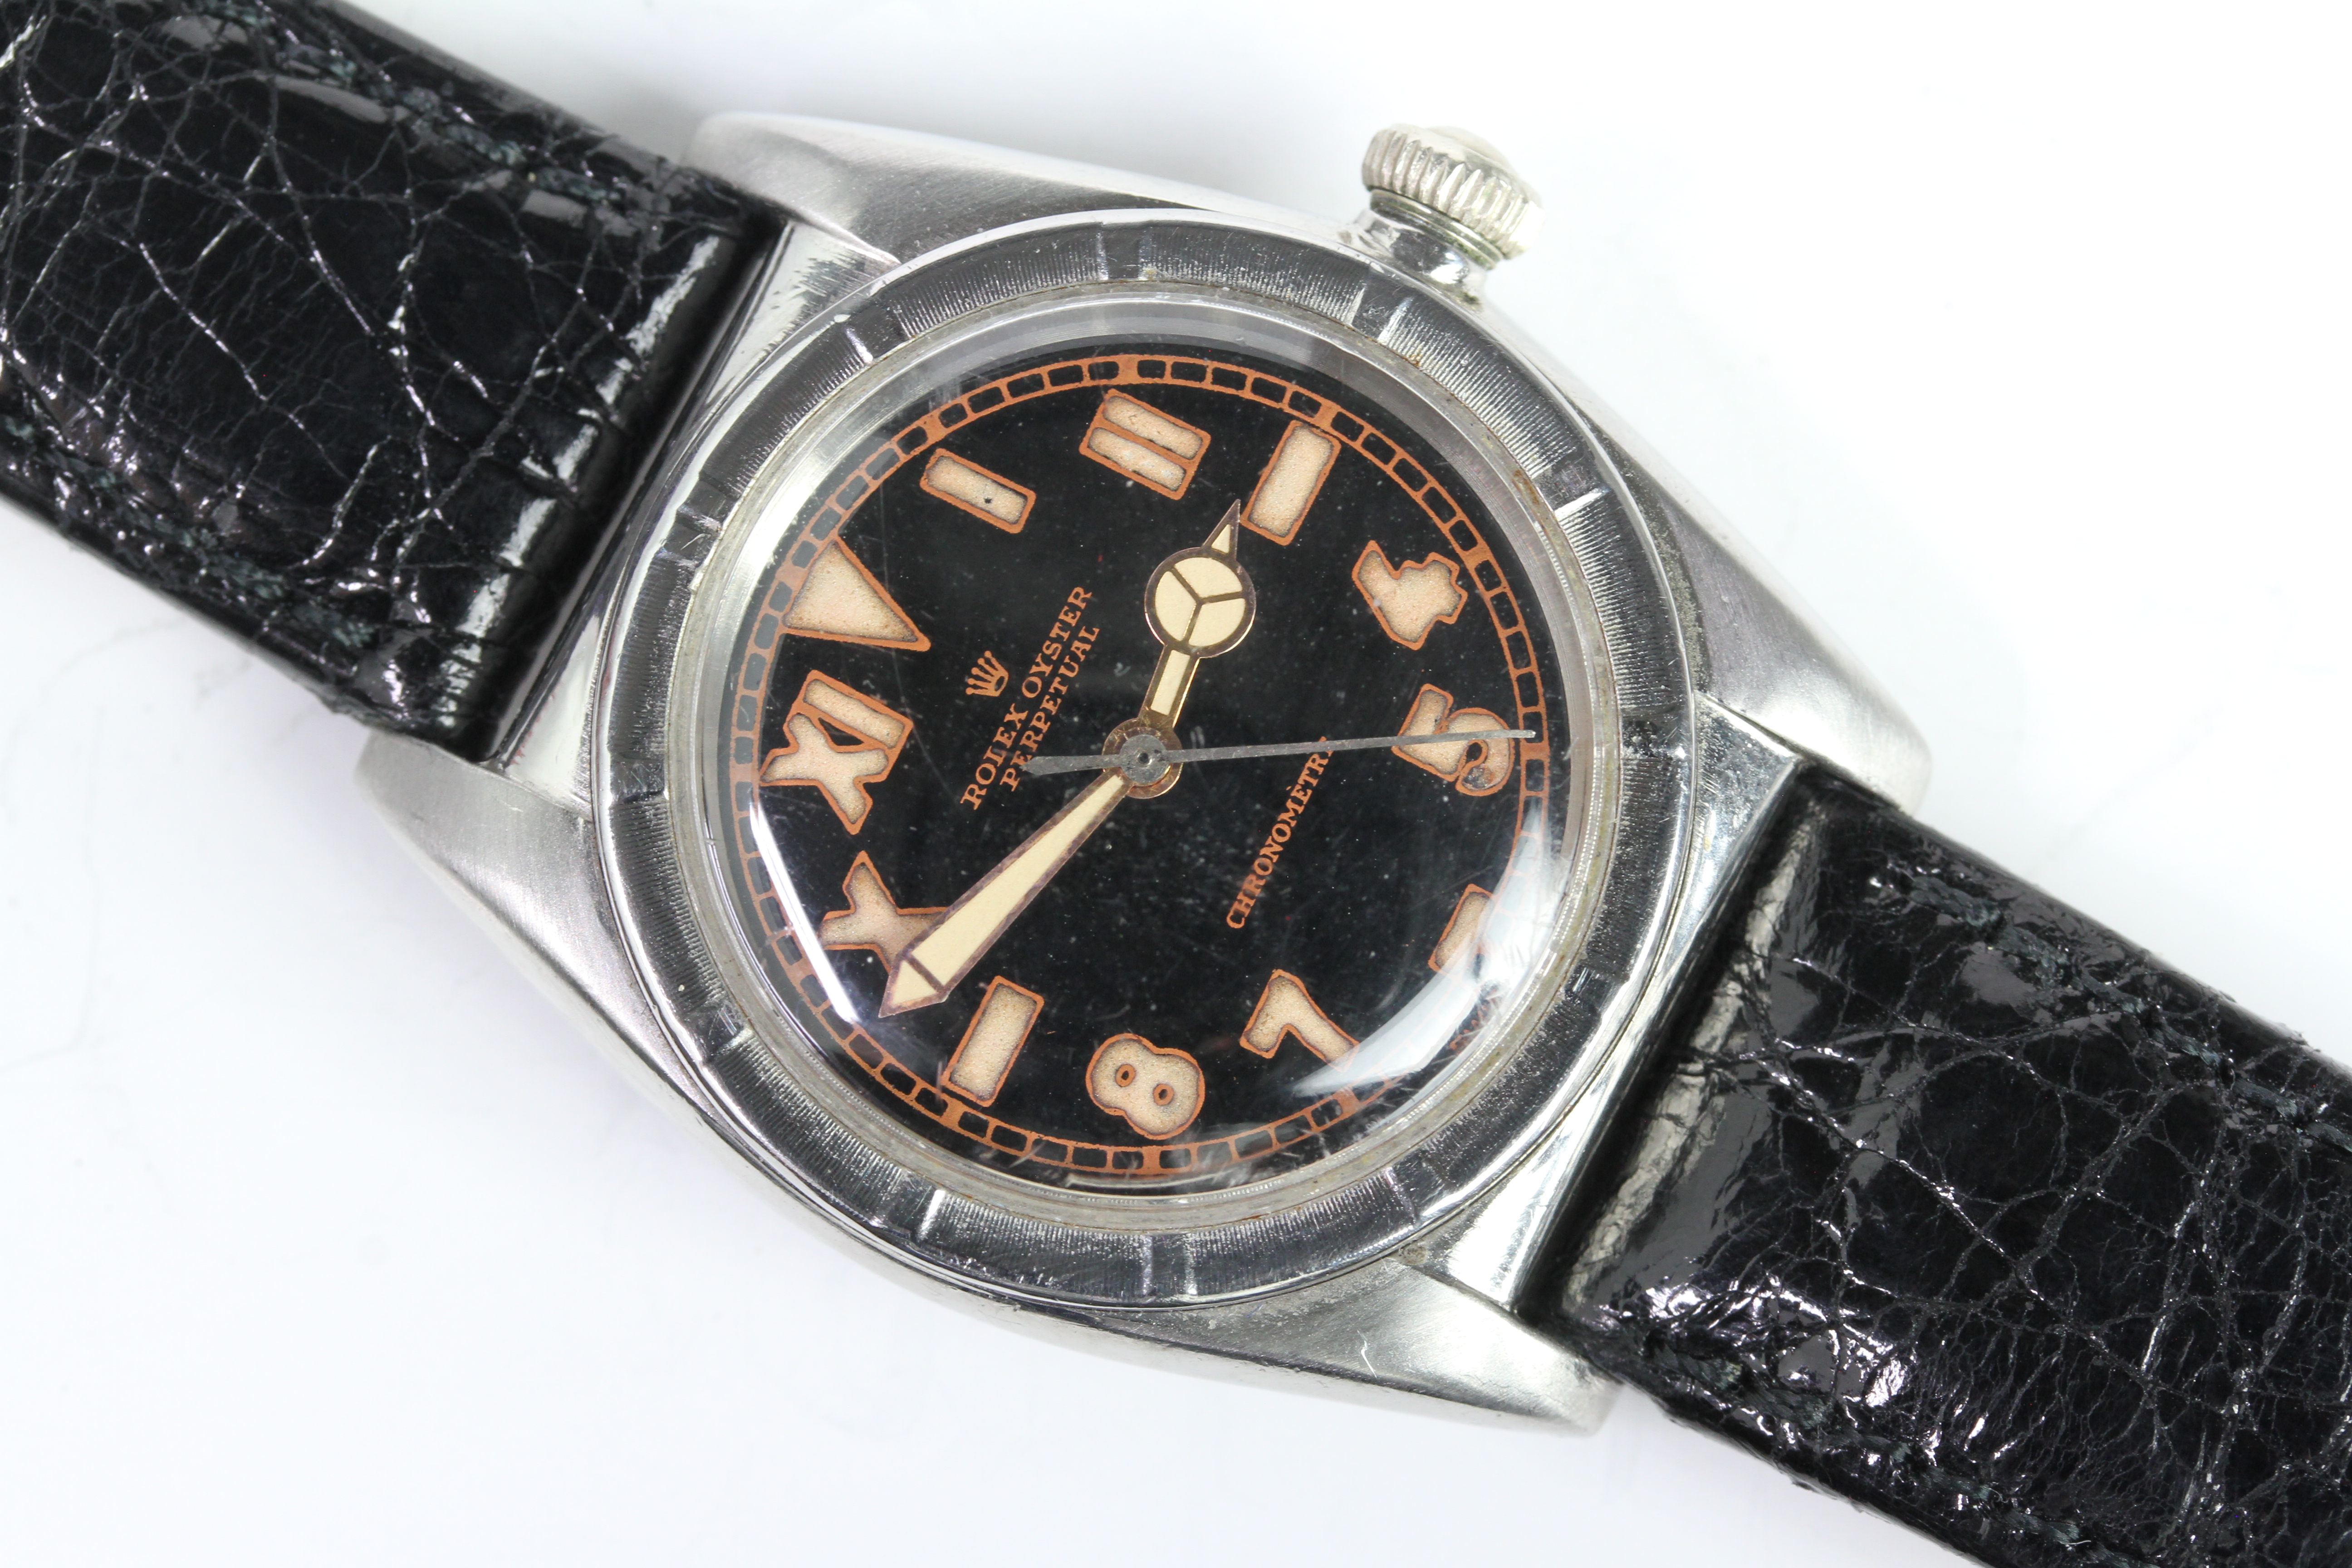 ROLEX OYSTER PERPETUAL 'BUBBLE BACK' REFERENCE 3372 CIRCA 1940s